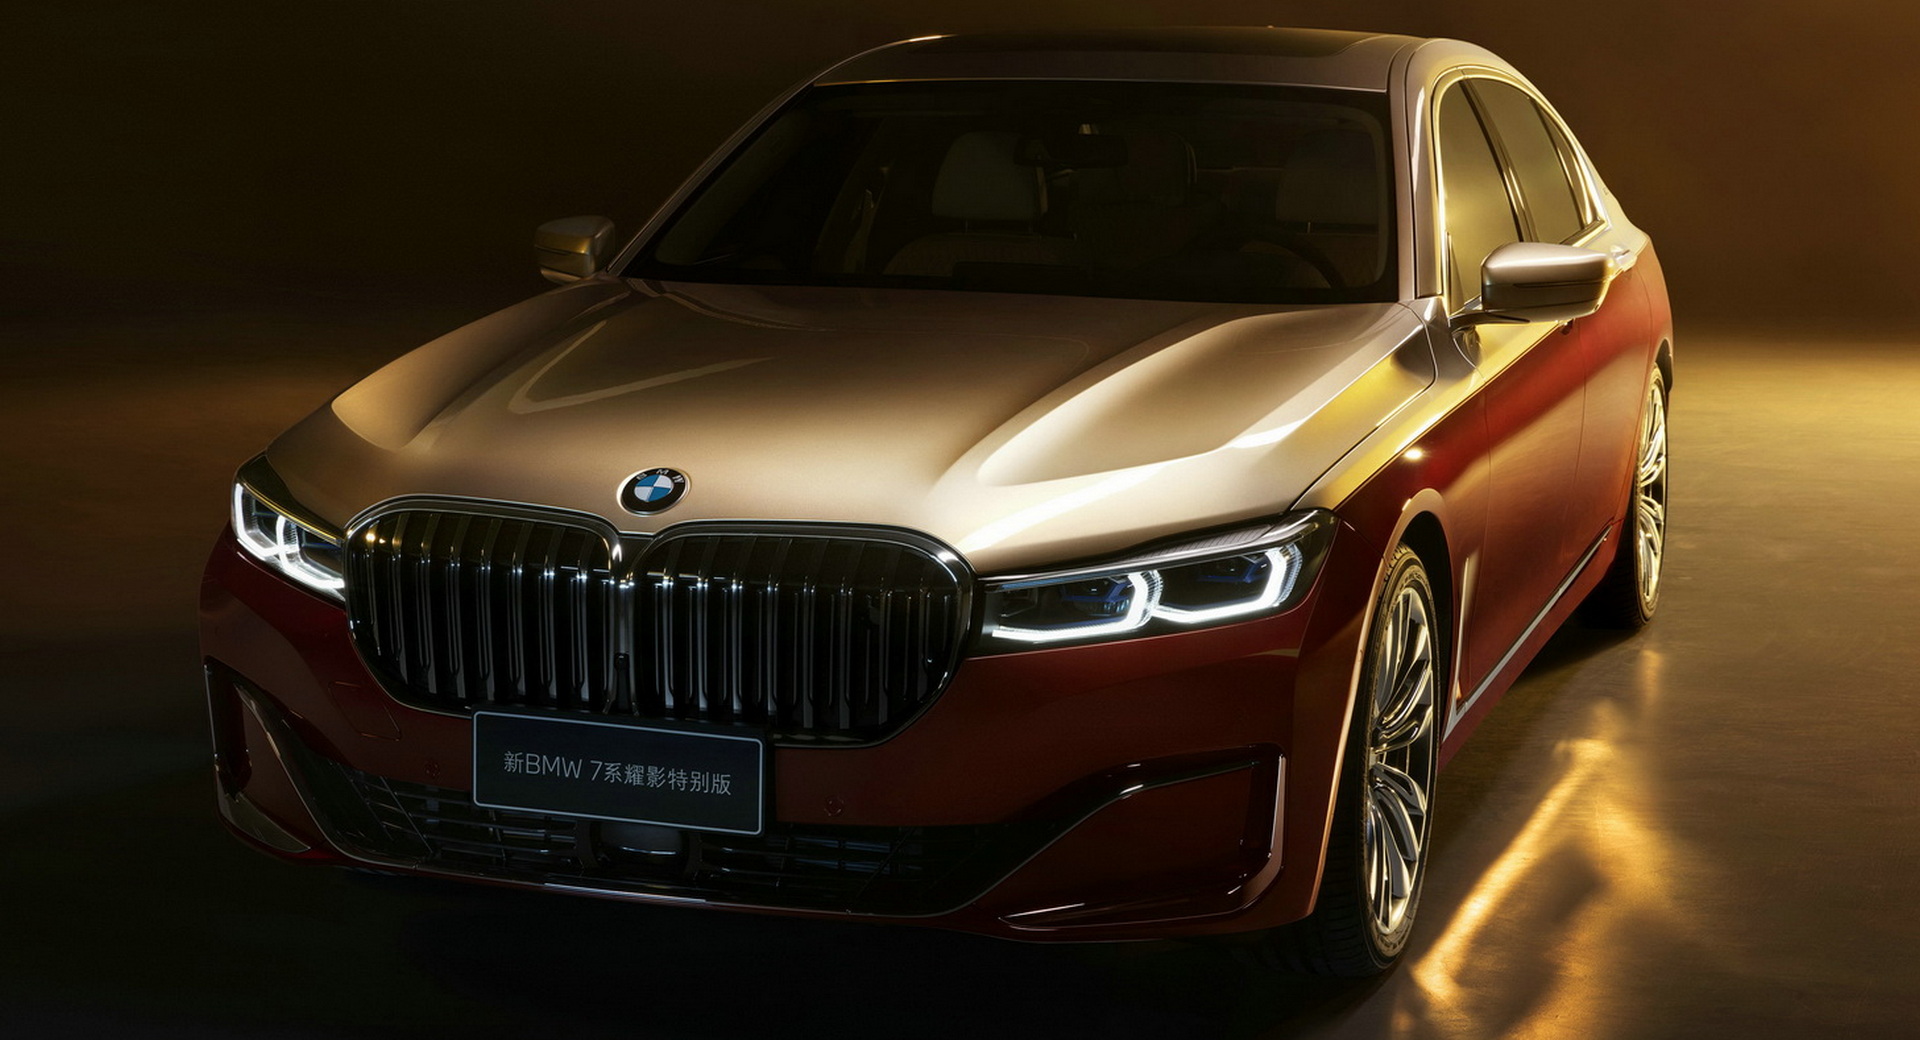 BMW Goes MaybachStyle With TwoTone 760Li Shining Shadow Special